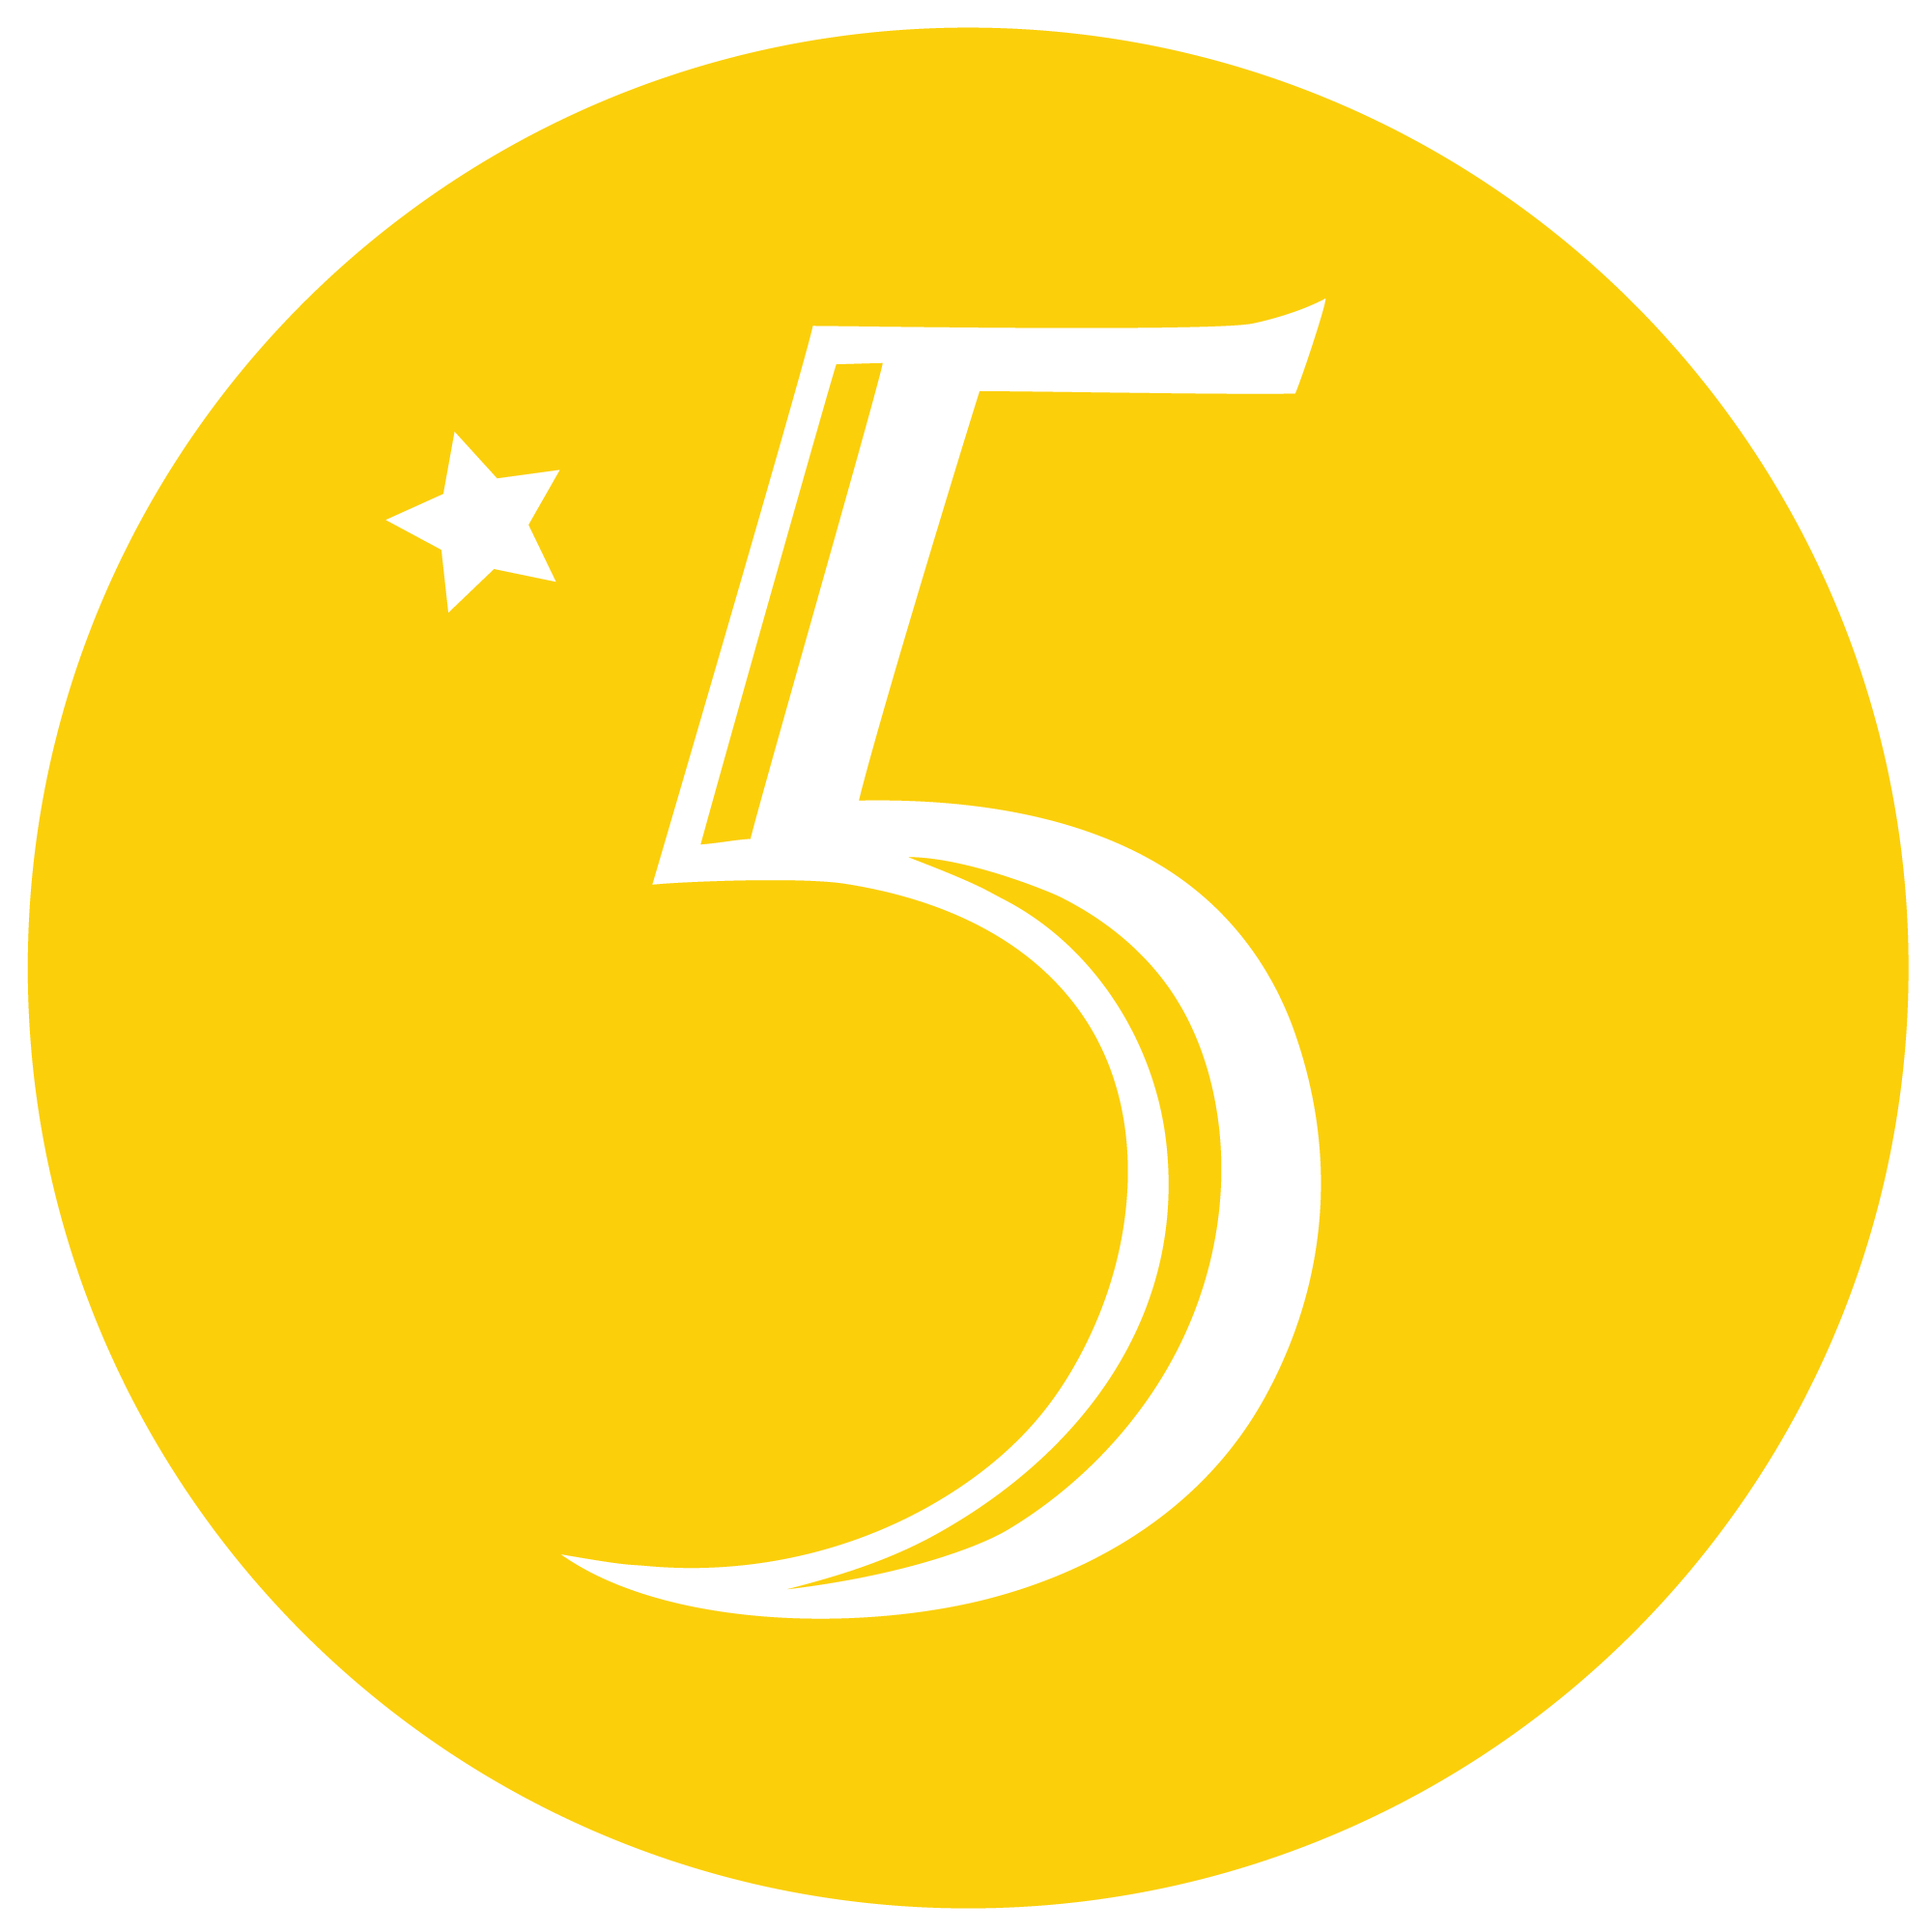 IU5 logo submark, yellow circle with small white star top left and large number 5 middle of circle